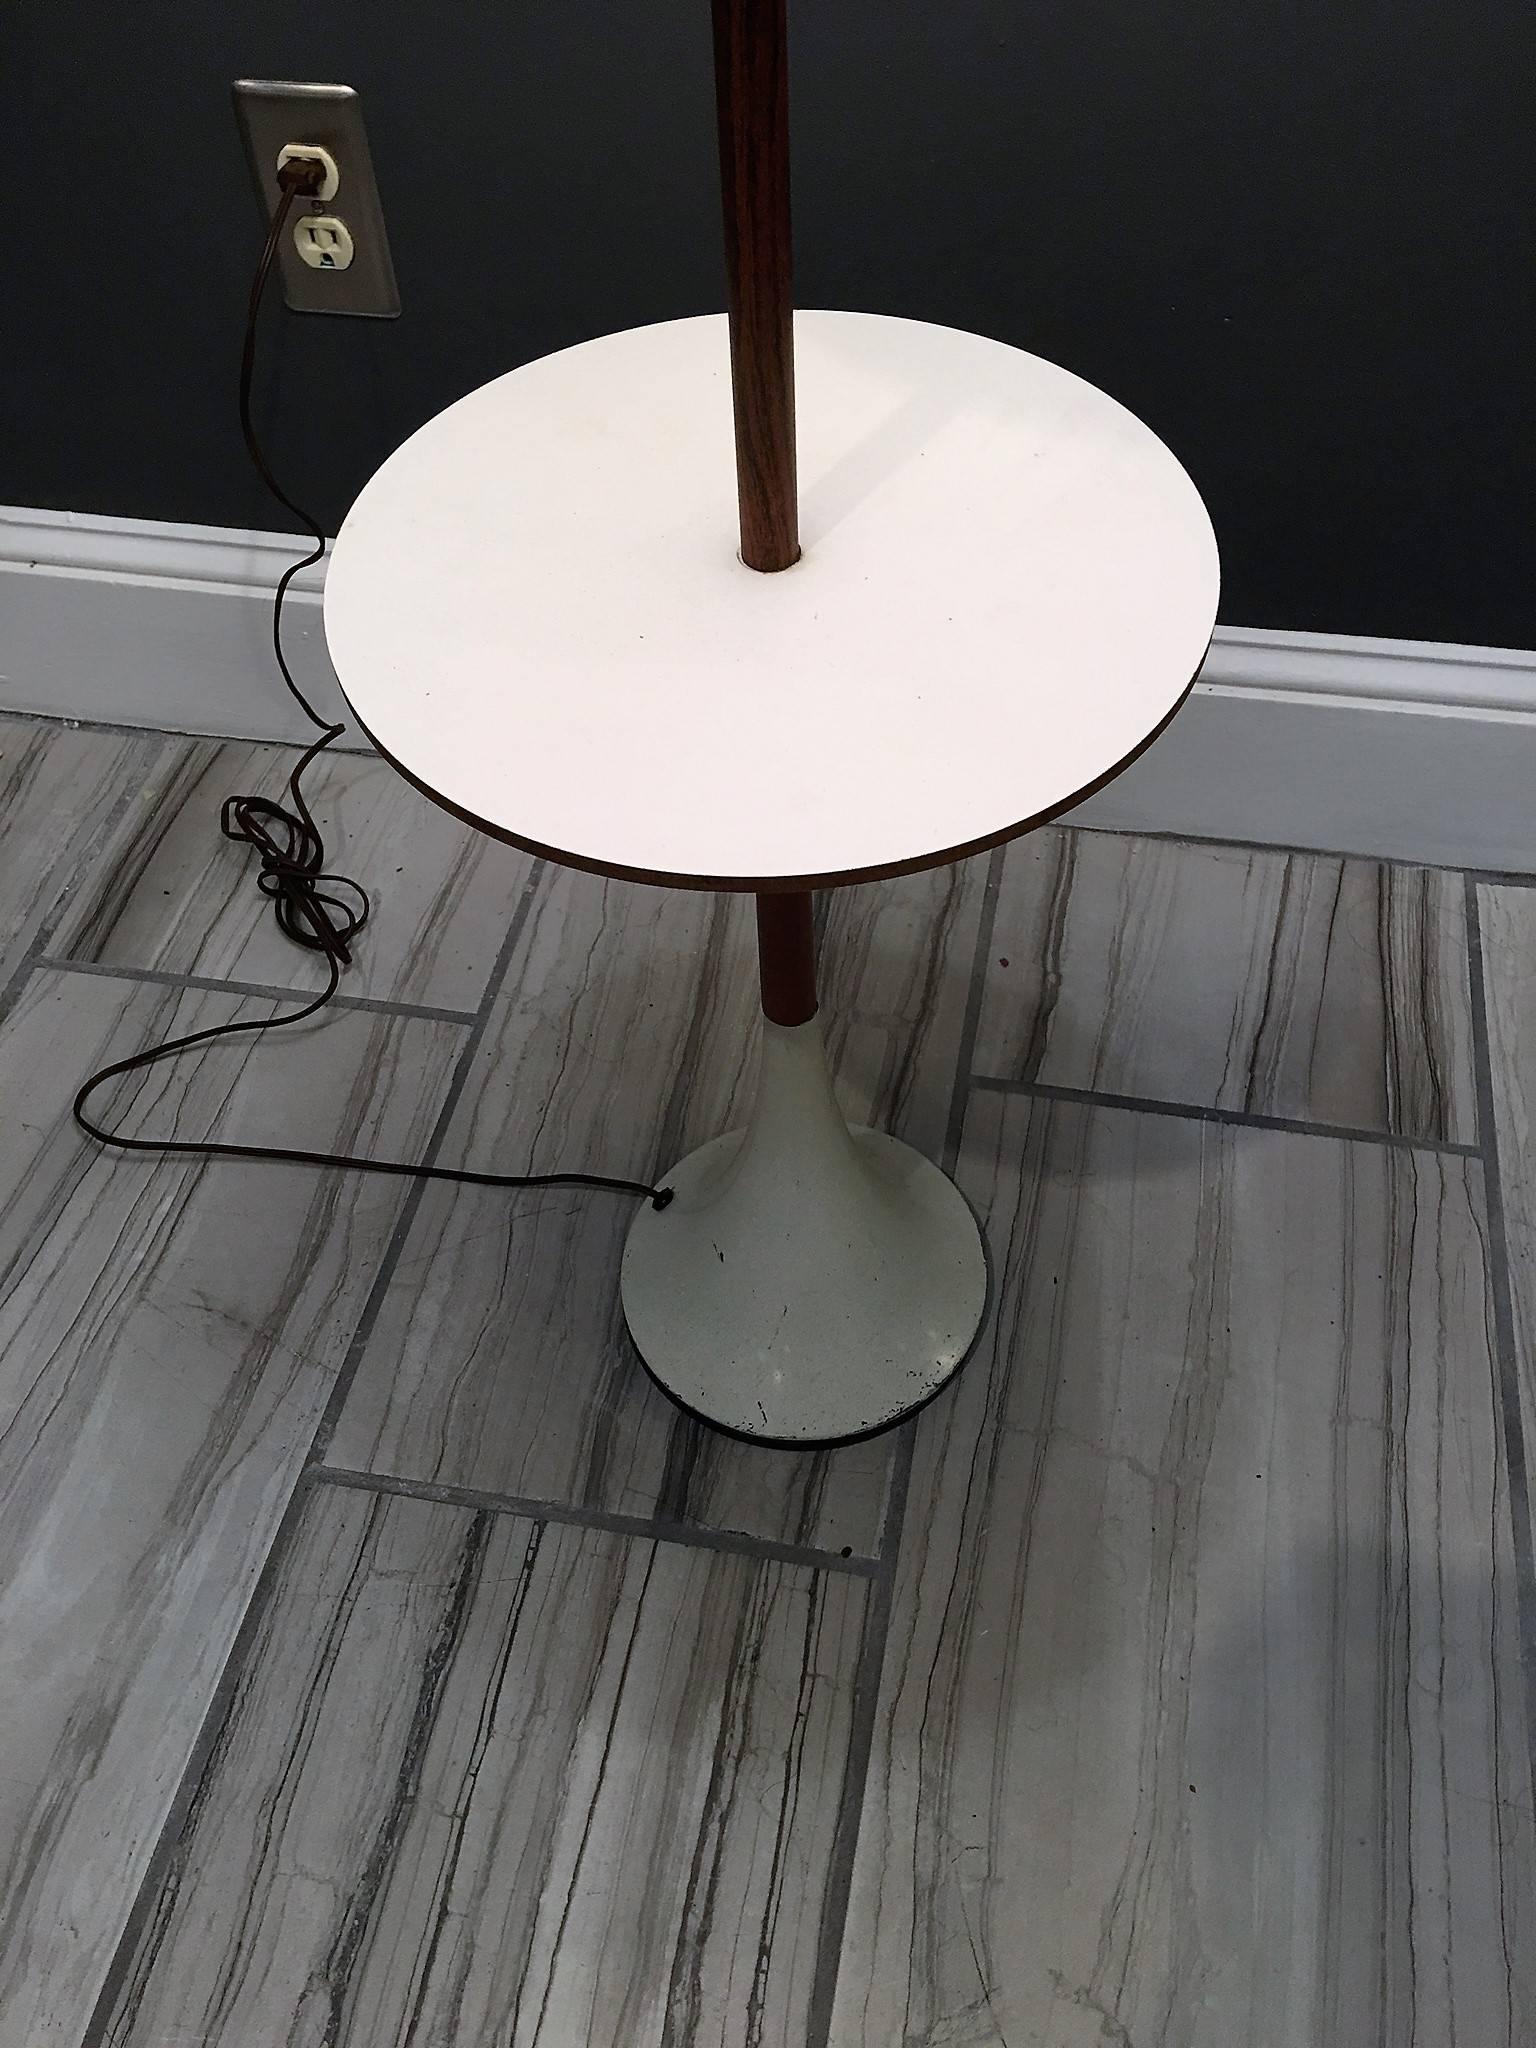 Modern design floor lamp with white laminate round table in centre and white enameled metal sculptural base. Teak lower stem and rosewood laminate upper stem. The diameter of the round table is 11 1/2